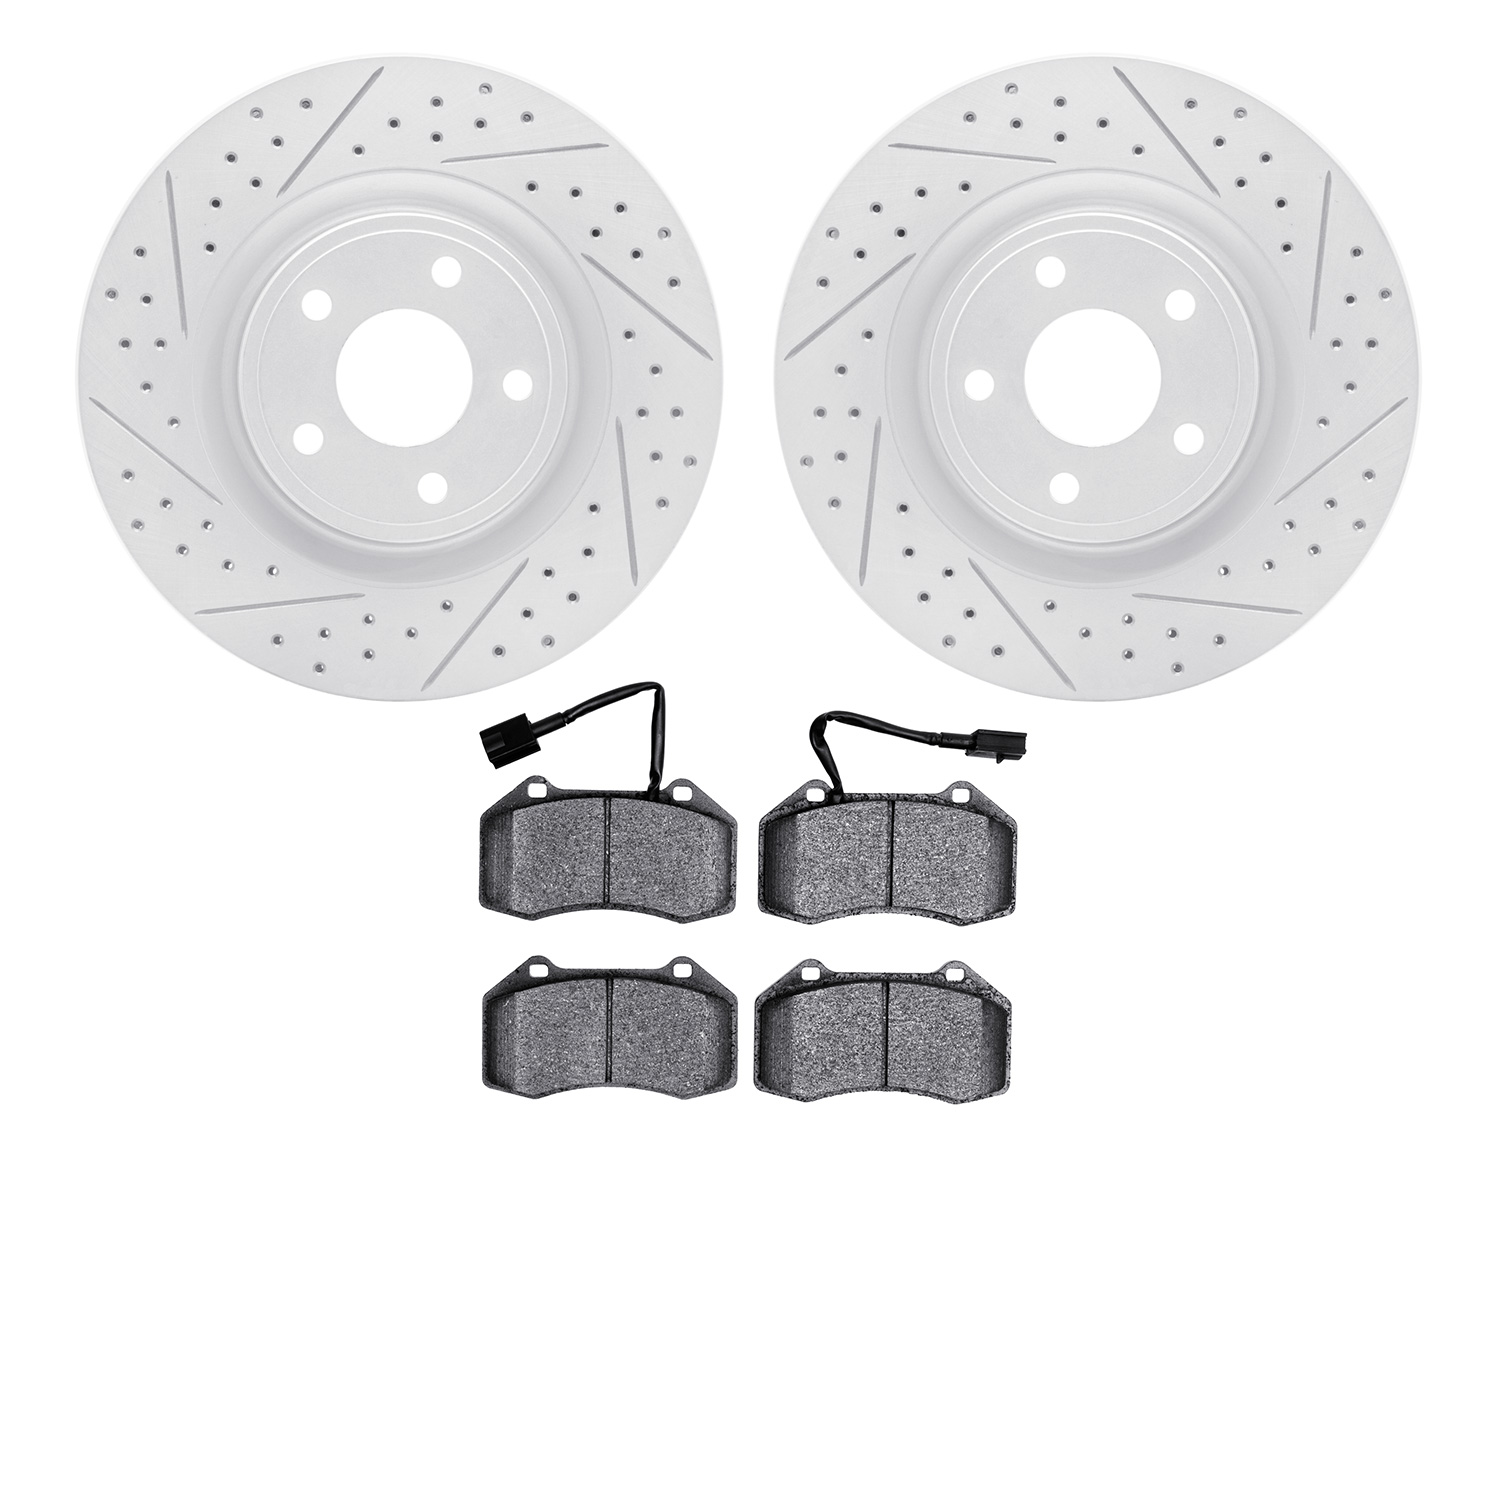 2502-47025 Geoperformance Drilled/Slotted Rotors w/5000 Advanced Brake Pads Kit, 2007-2010 GM, Position: Front